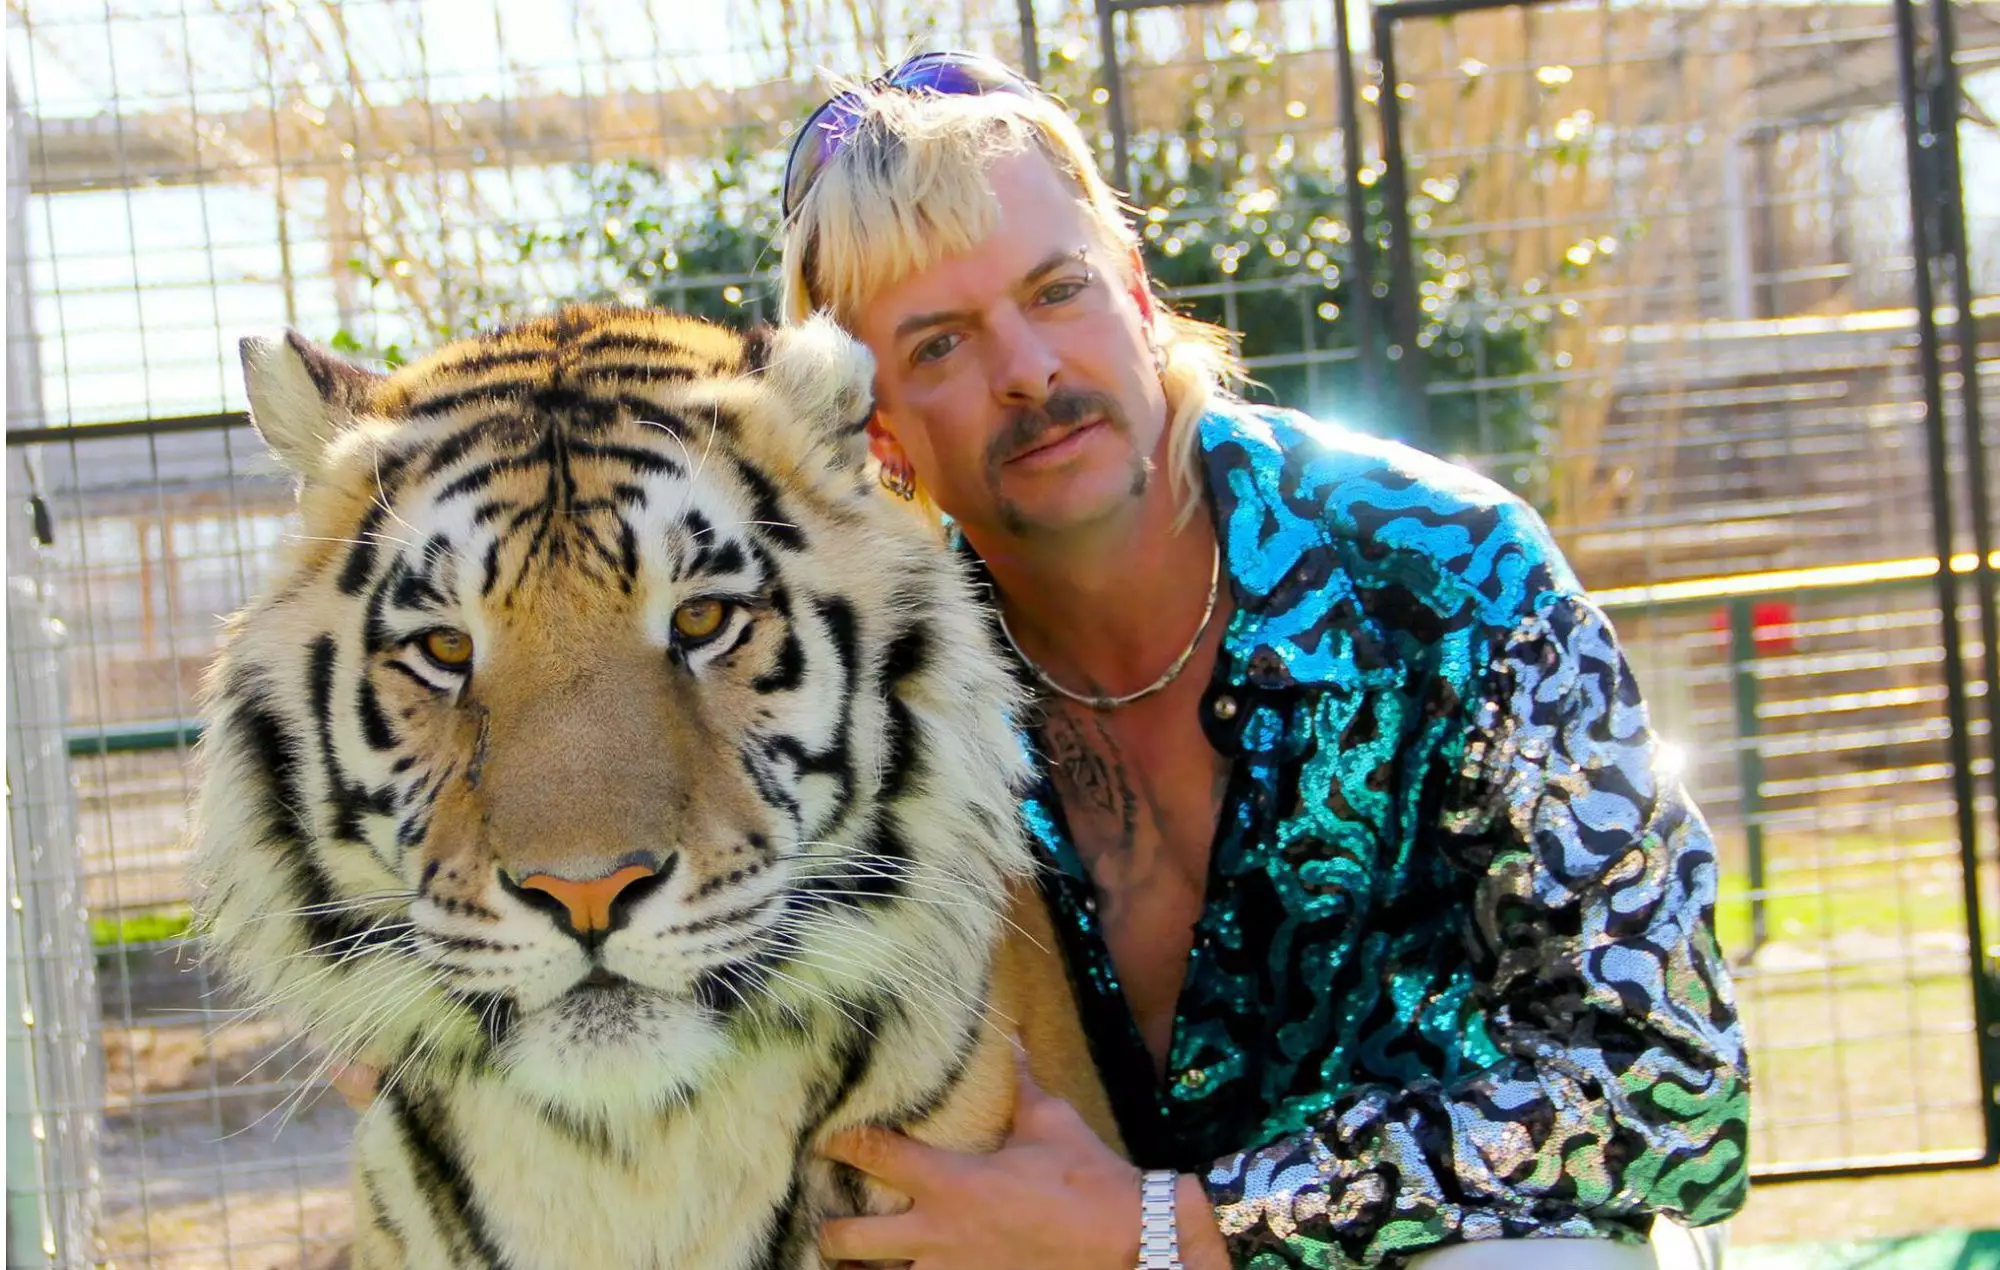 Jeff is going to spill more on his relationship with Joe Exotic (